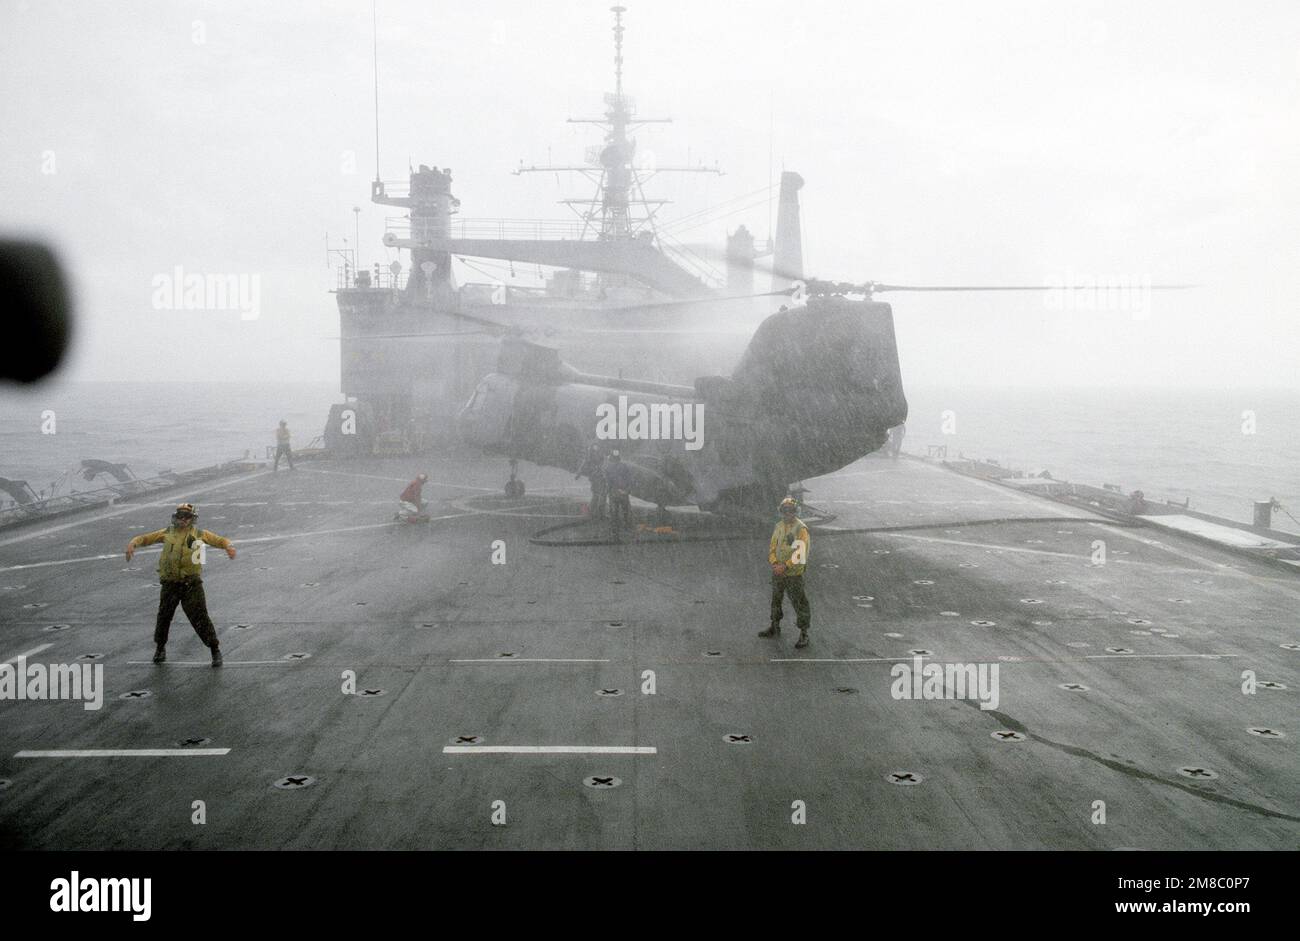 Fog obscures a CH-46E Sea Knight helicopter of Marine Medium Helicopter Squadron 163 (HMM-163) on the flight deck of the amphibious transport dock USS VANCOUVER (LPD-2) during the joint Thai/U.S. exercise Thalay Thai '89. Subject Operation/Series: THALAY THAI '89 Country: Gulf Of Thailand Stock Photo